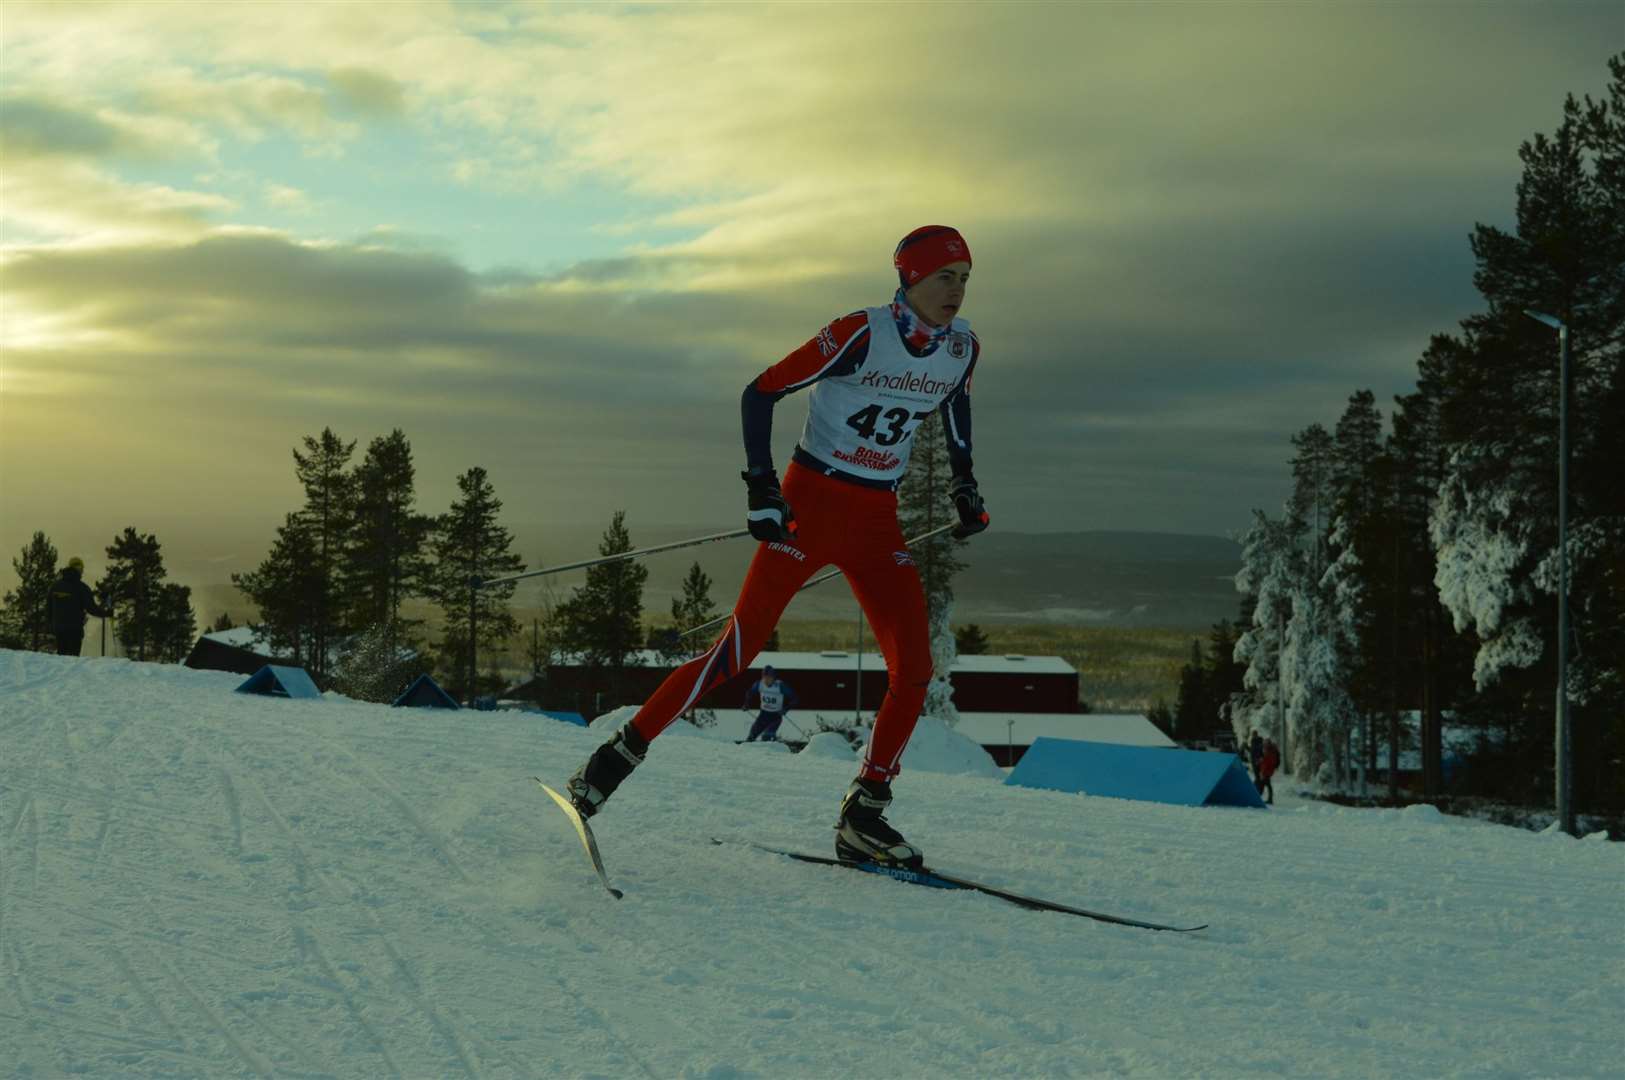 James Slimon has been hard at work in preparation for the Winter Youth Olympic Games.